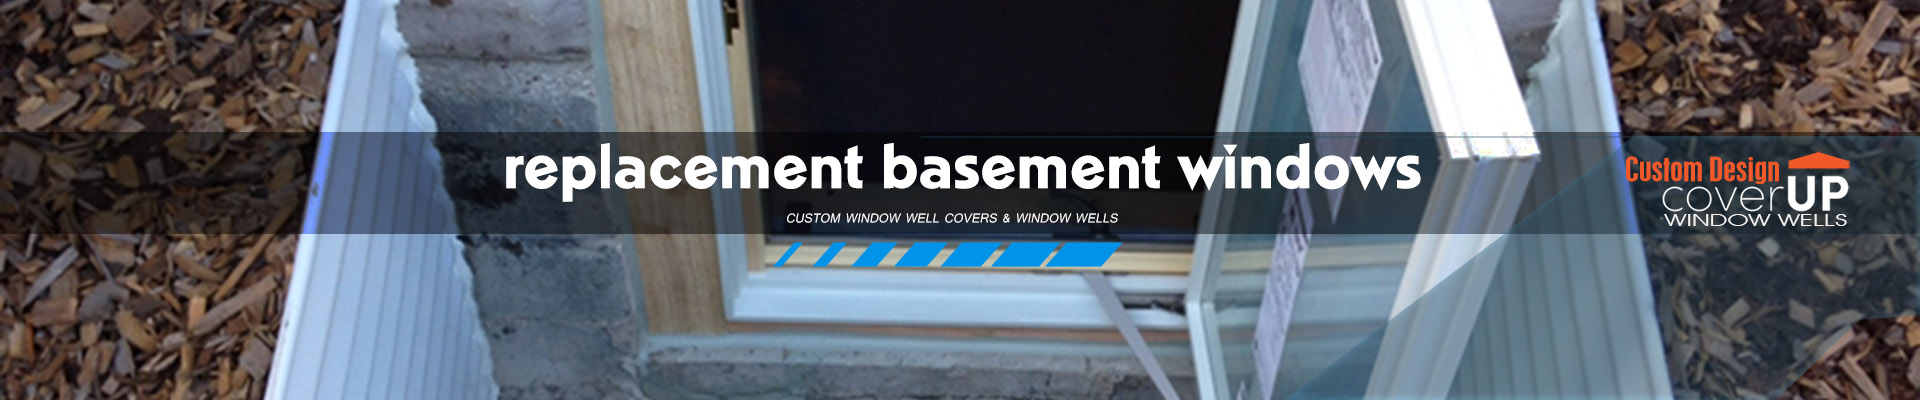 Basement Windows Replacement Contractor Cover Up